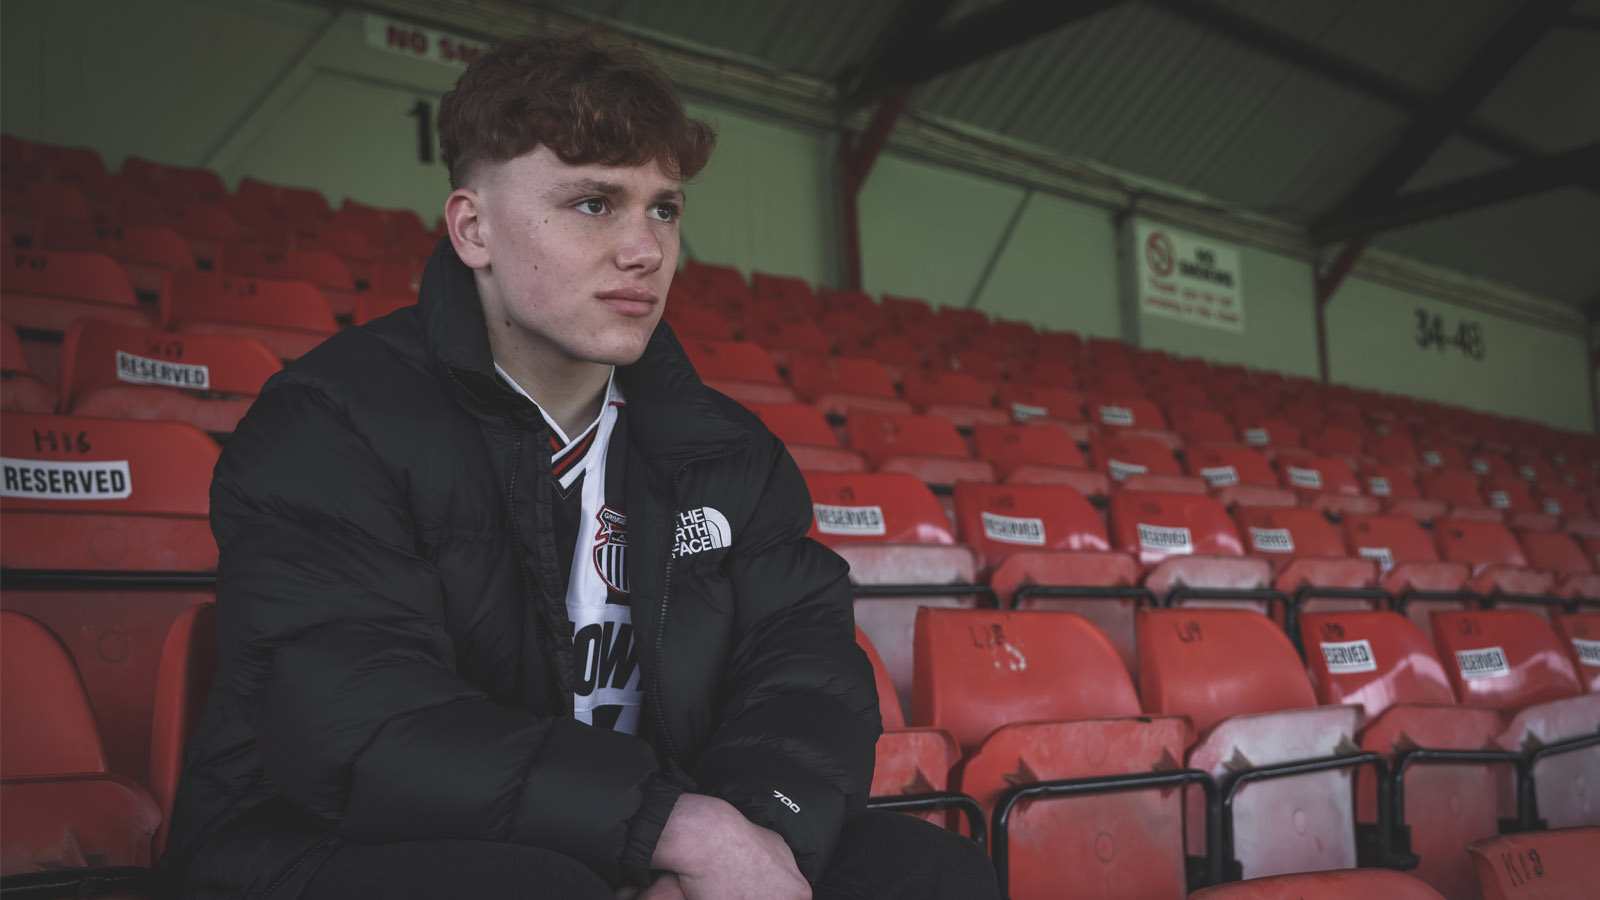 Alfie Artist sat in the stand at blundell park